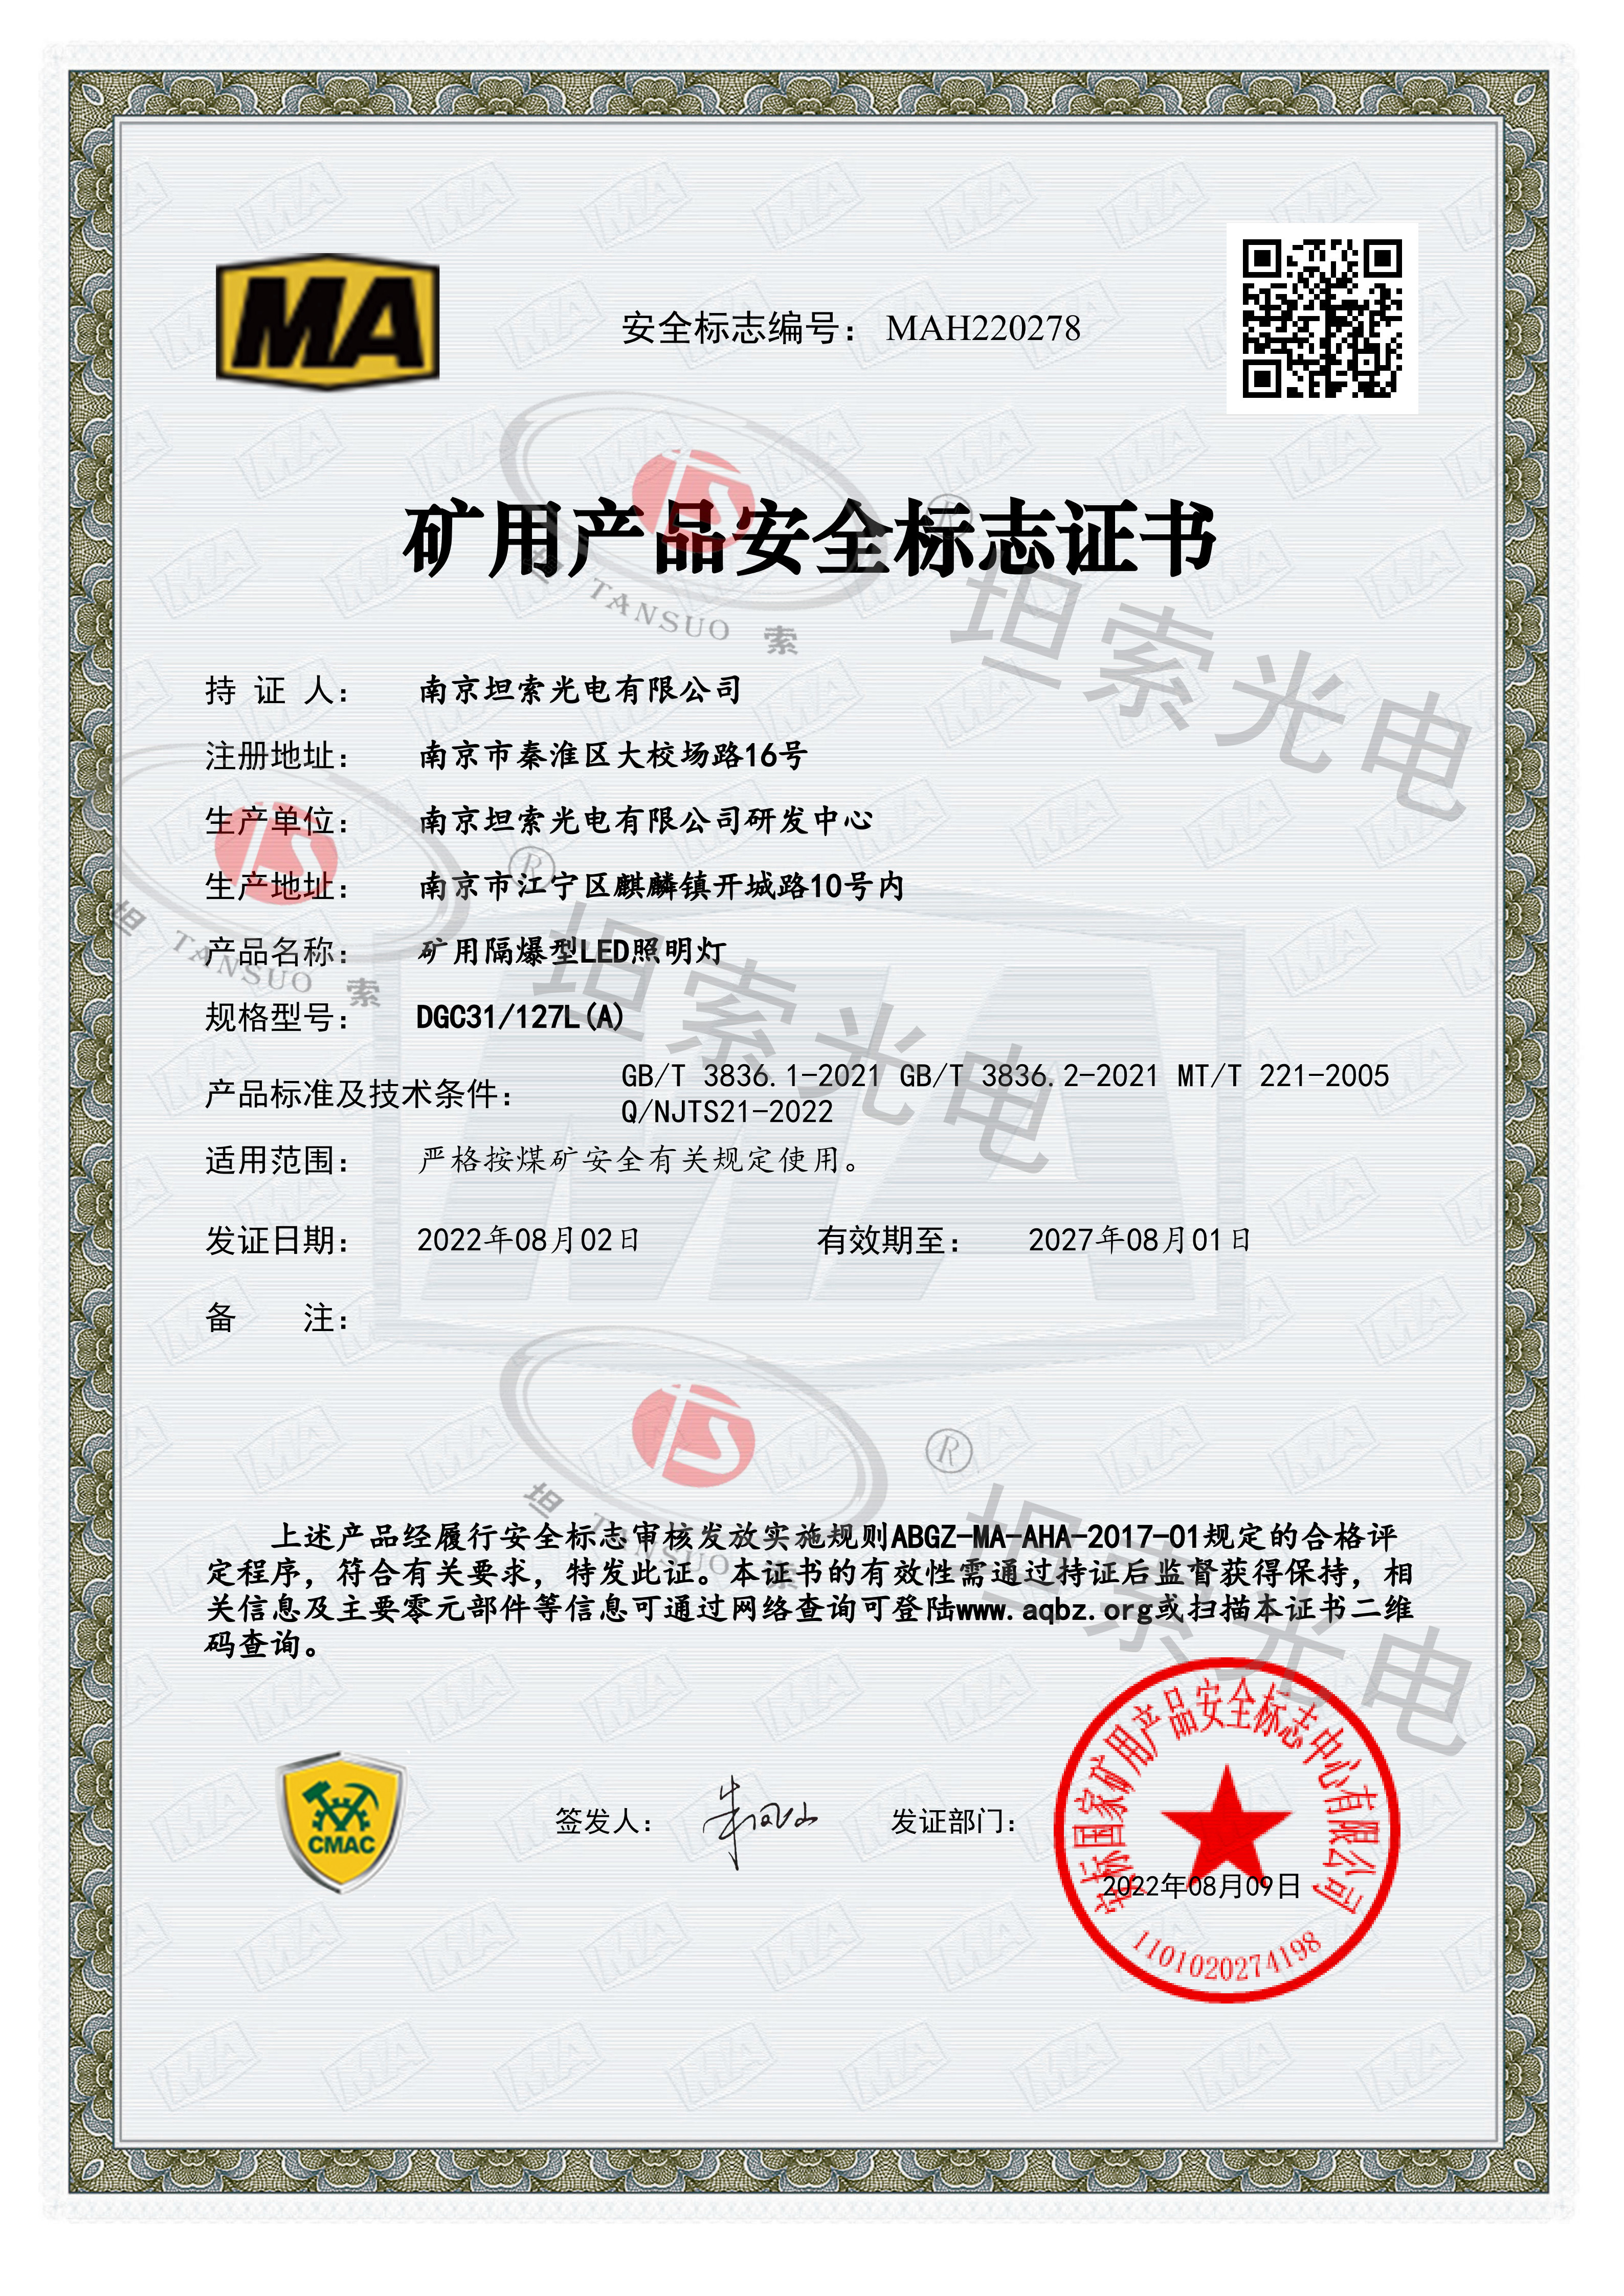 Pleased to obtain the safety mark certificate of mining products